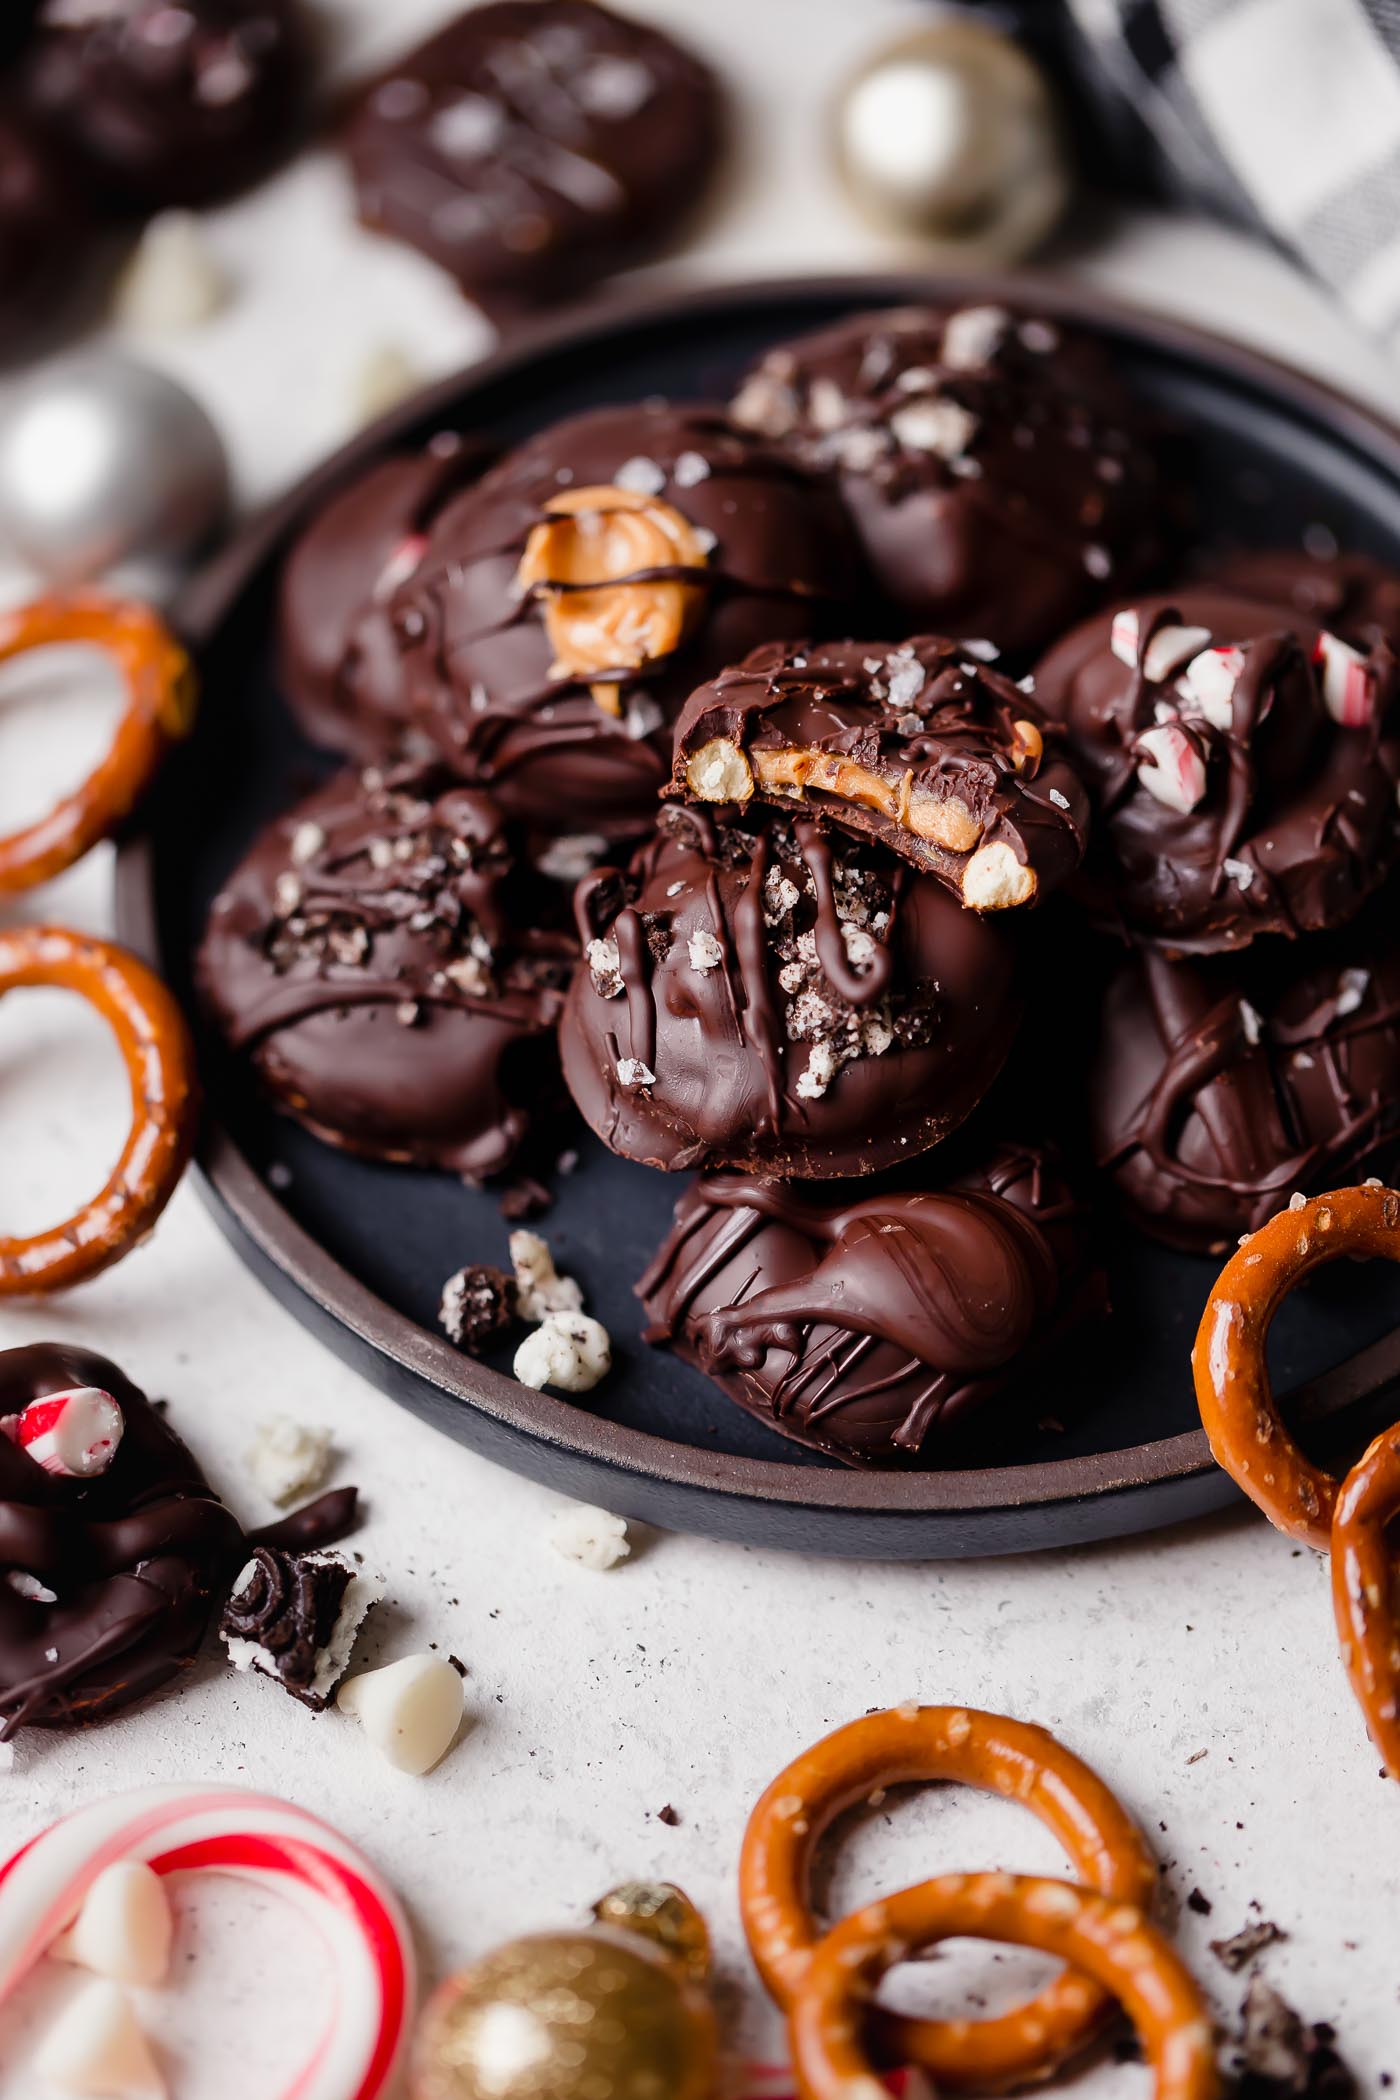 stuffed dark chocolate dipped pretzels. holiday pretzel rounds get filled with peanut butter, salted caramel, oreos, peppermint candies, or any other fillings you love, & covered in dark chocolate. these stuffed dark chocolate dipped pretzels take chocolate covered pretzels to the next level, & they’re the perfect easy no-bake treat to add to your christmas cookie plates this year! #playswellwithbutter #chocolatepretzels #nobakedessert #chocolatedippedpretzels #stuffedpretzels #howtomakechocolatepretzels